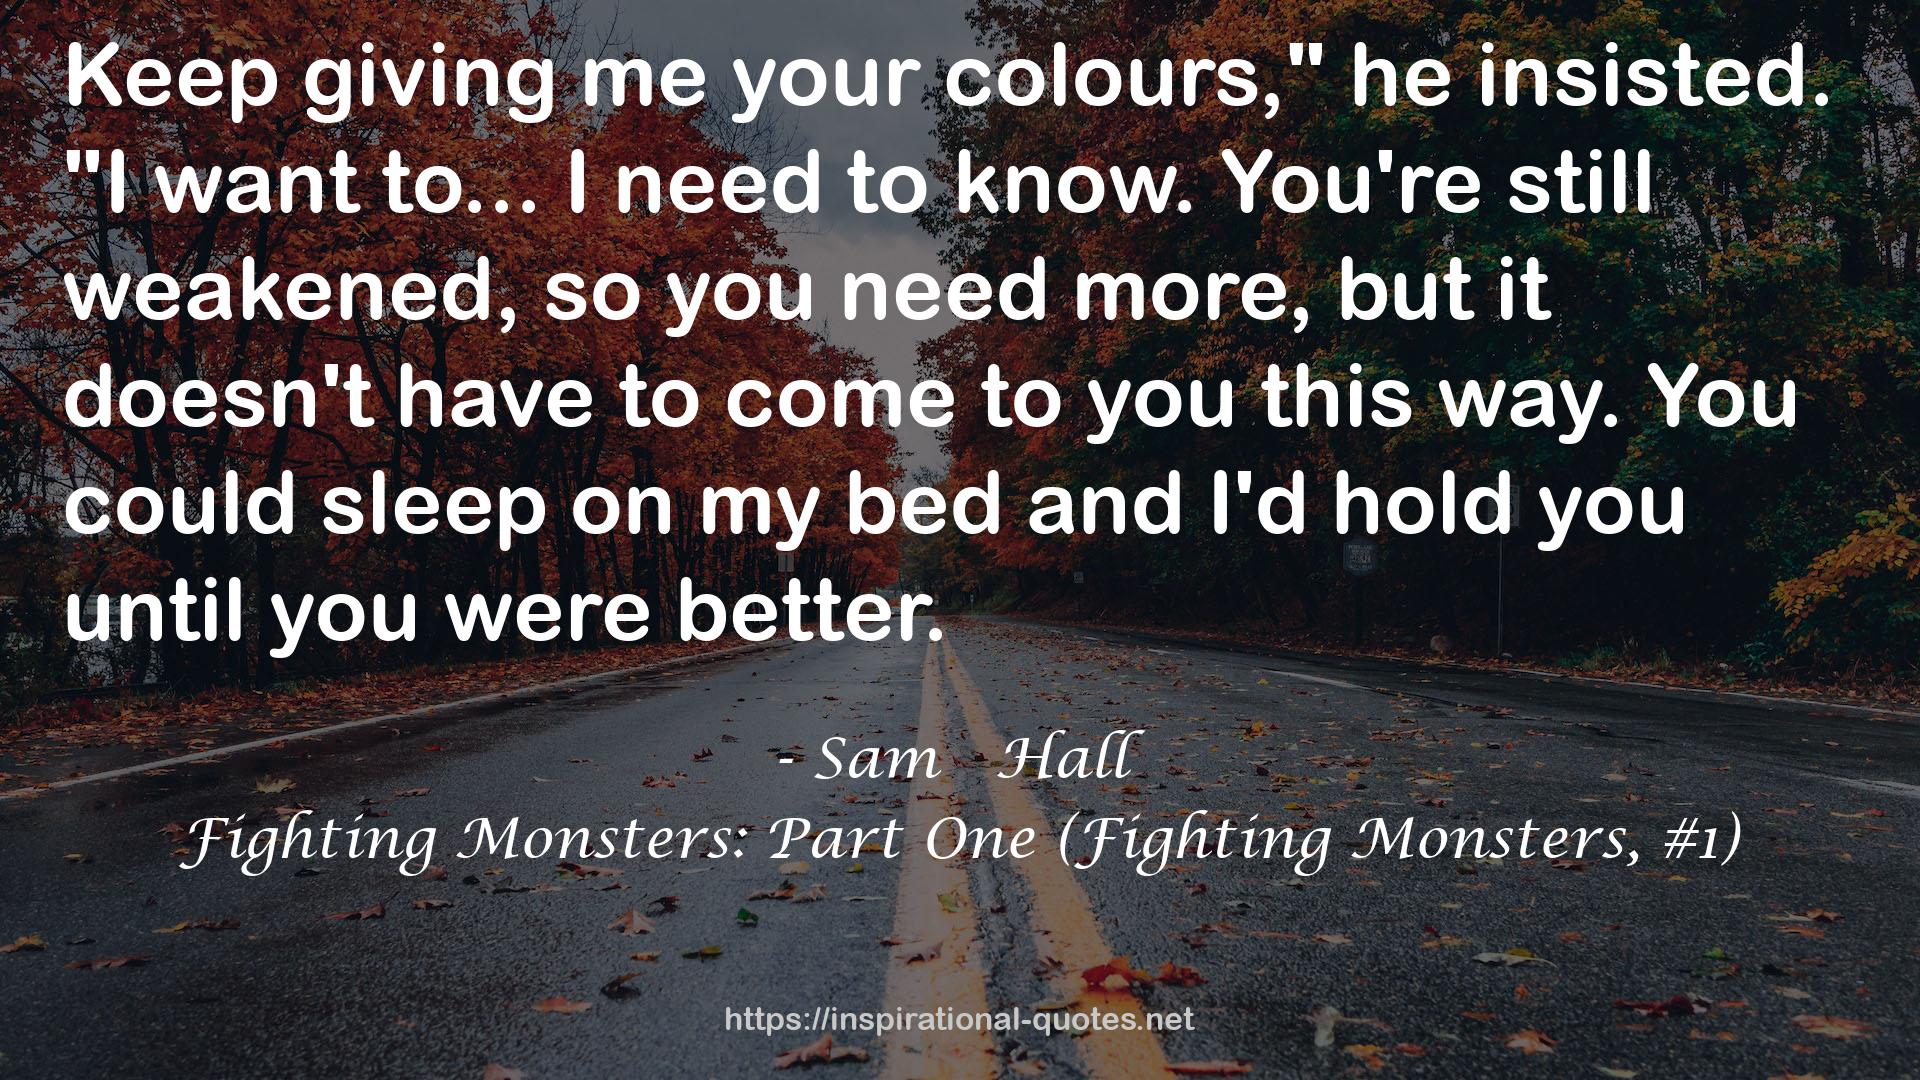 Fighting Monsters: Part One (Fighting Monsters, #1) QUOTES